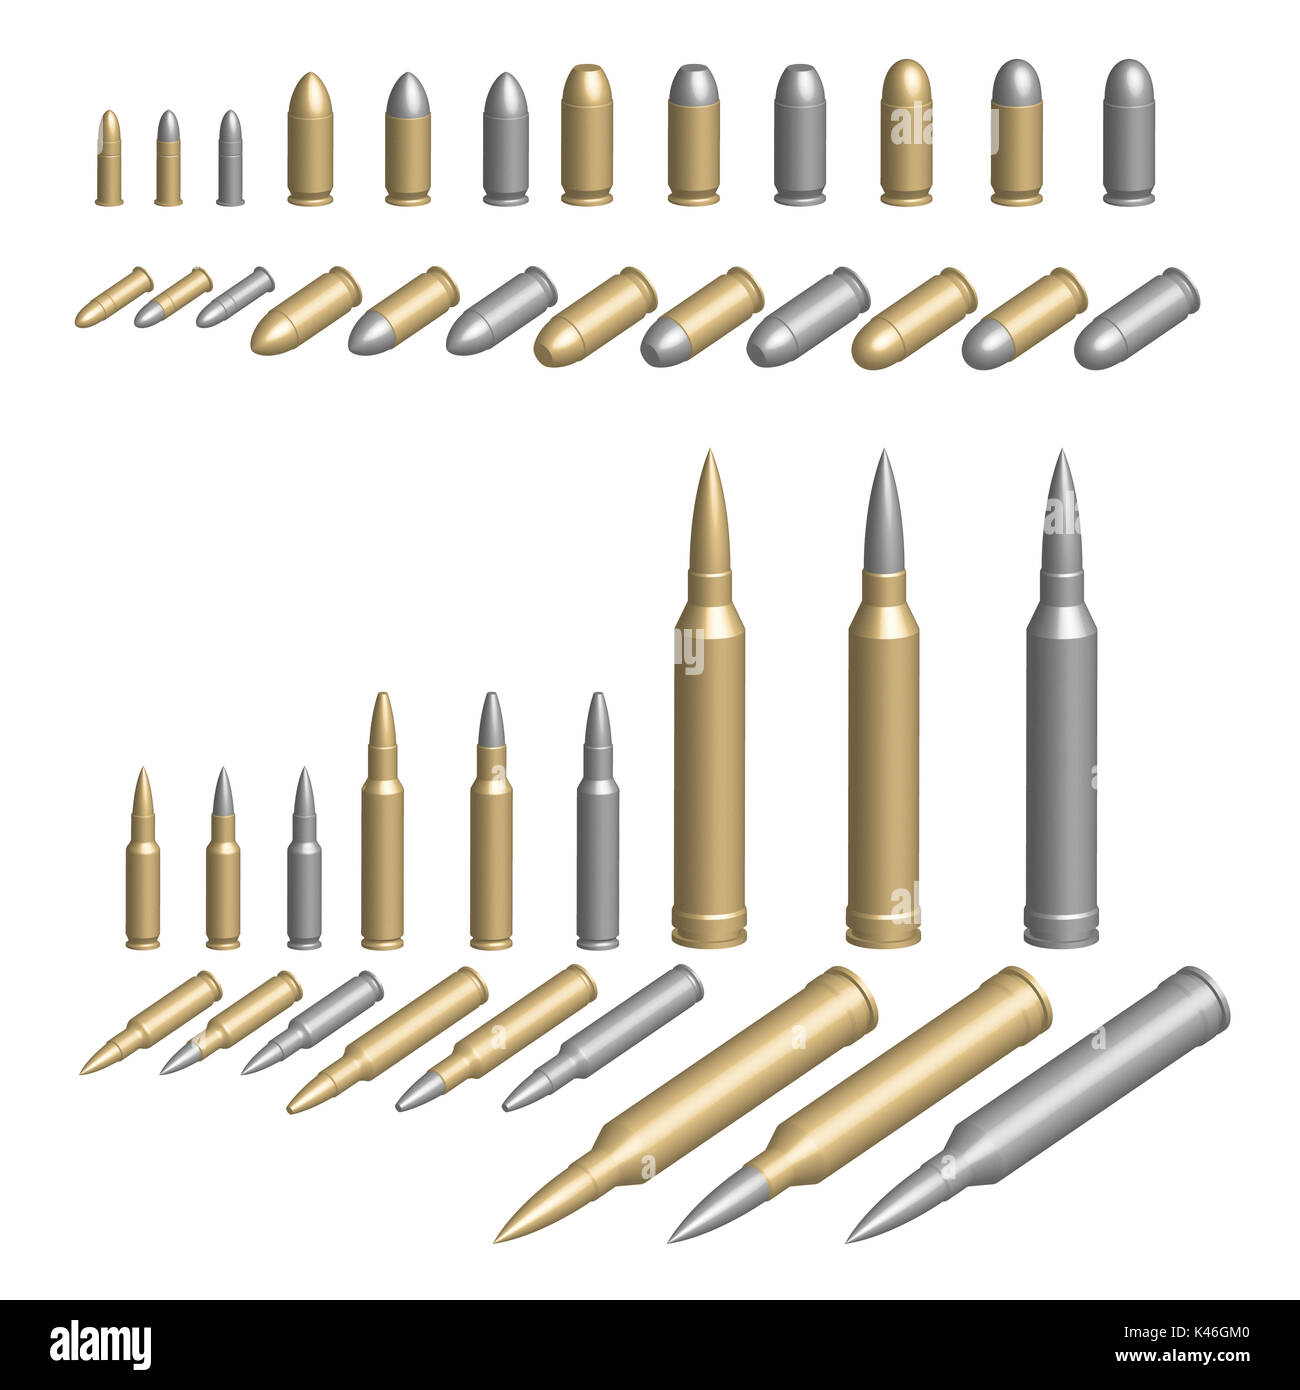 Variety of bullets illustrated in brass silver or steel casings Stock Photo